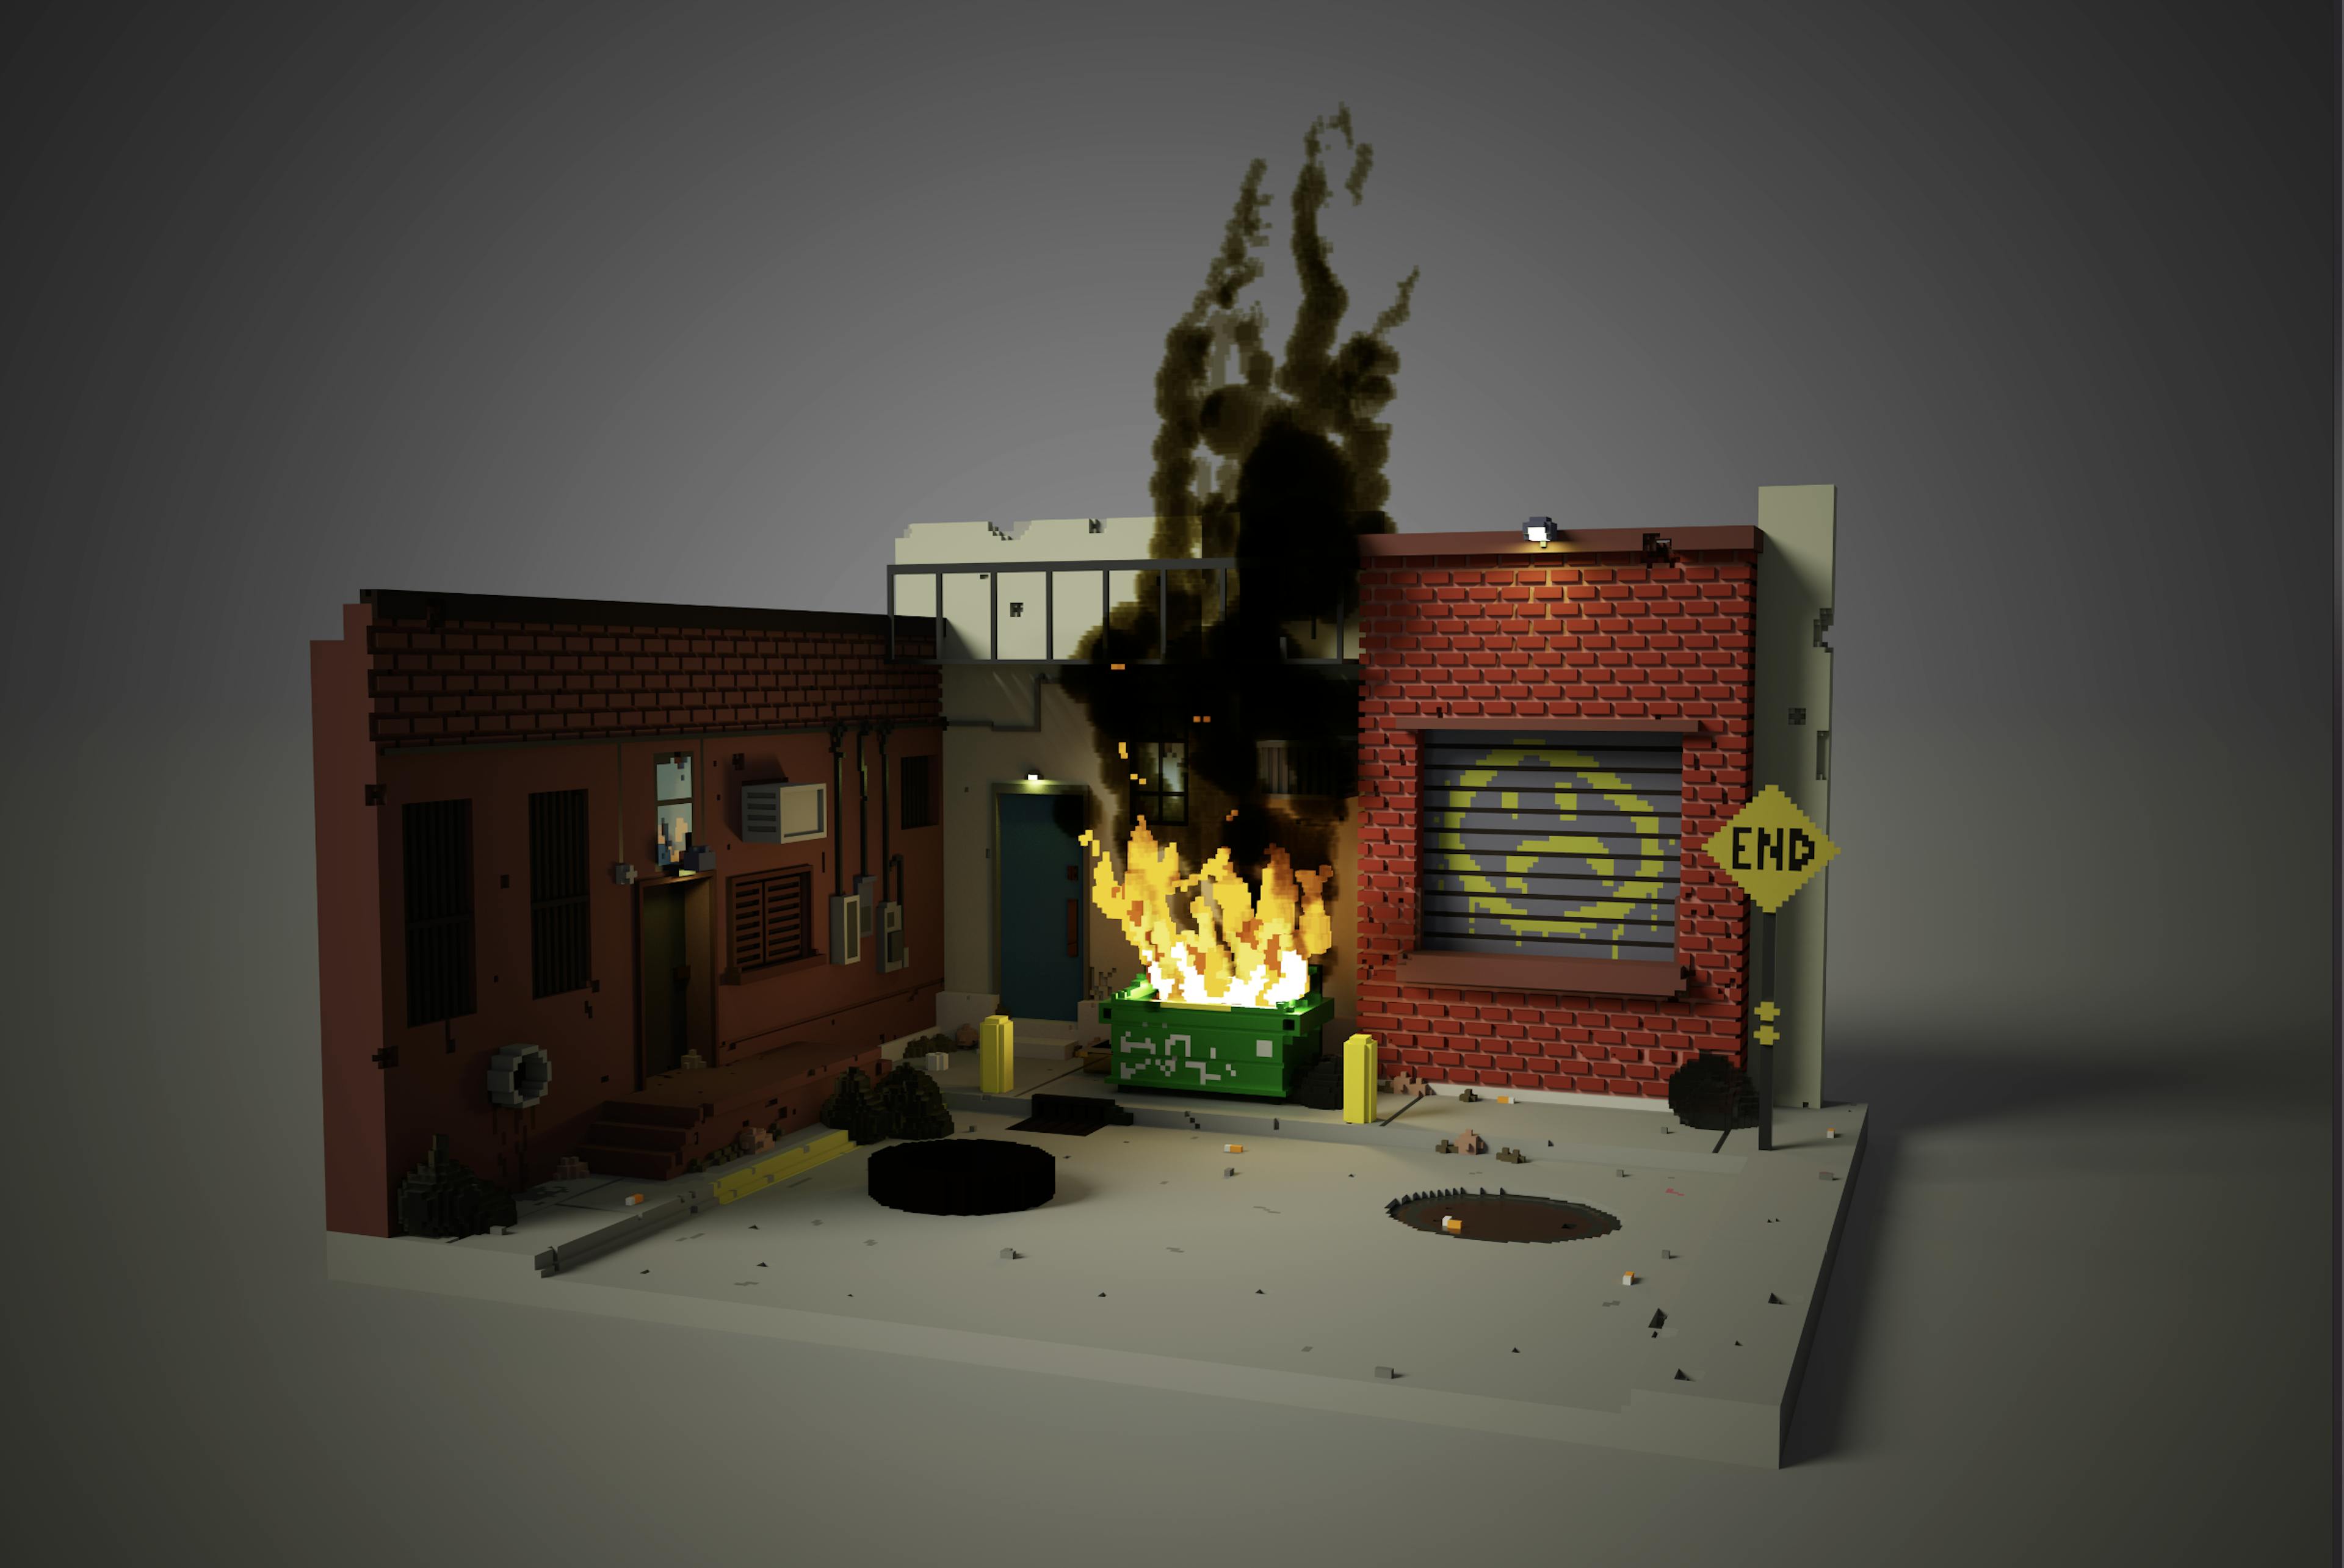 A scene I built and rendered in MagicaVoxel